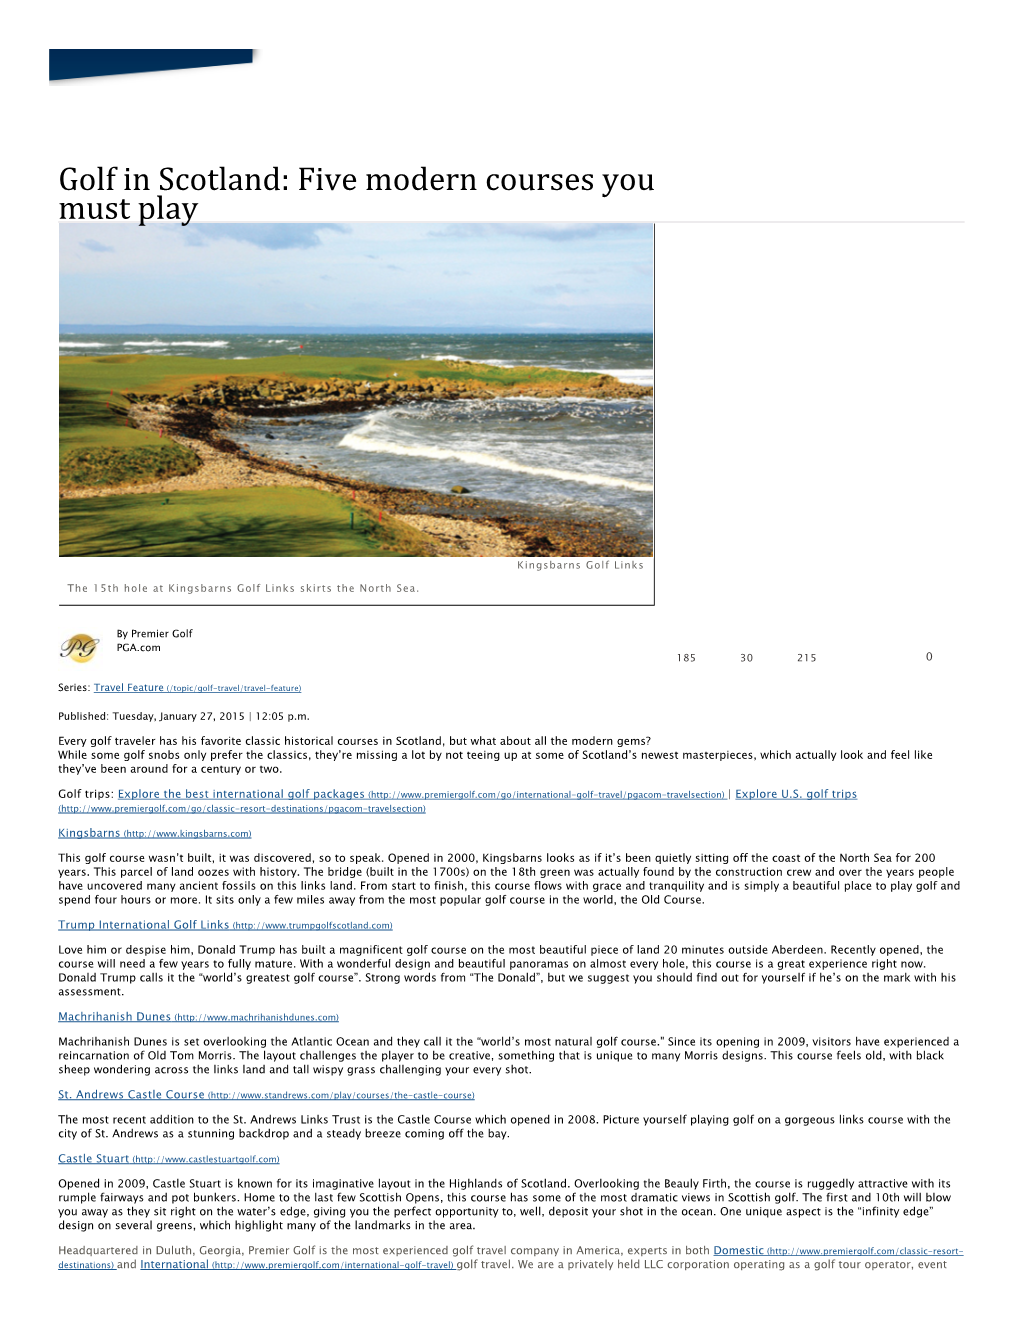 Golf in Scotland: Five Modern Courses You Must Play